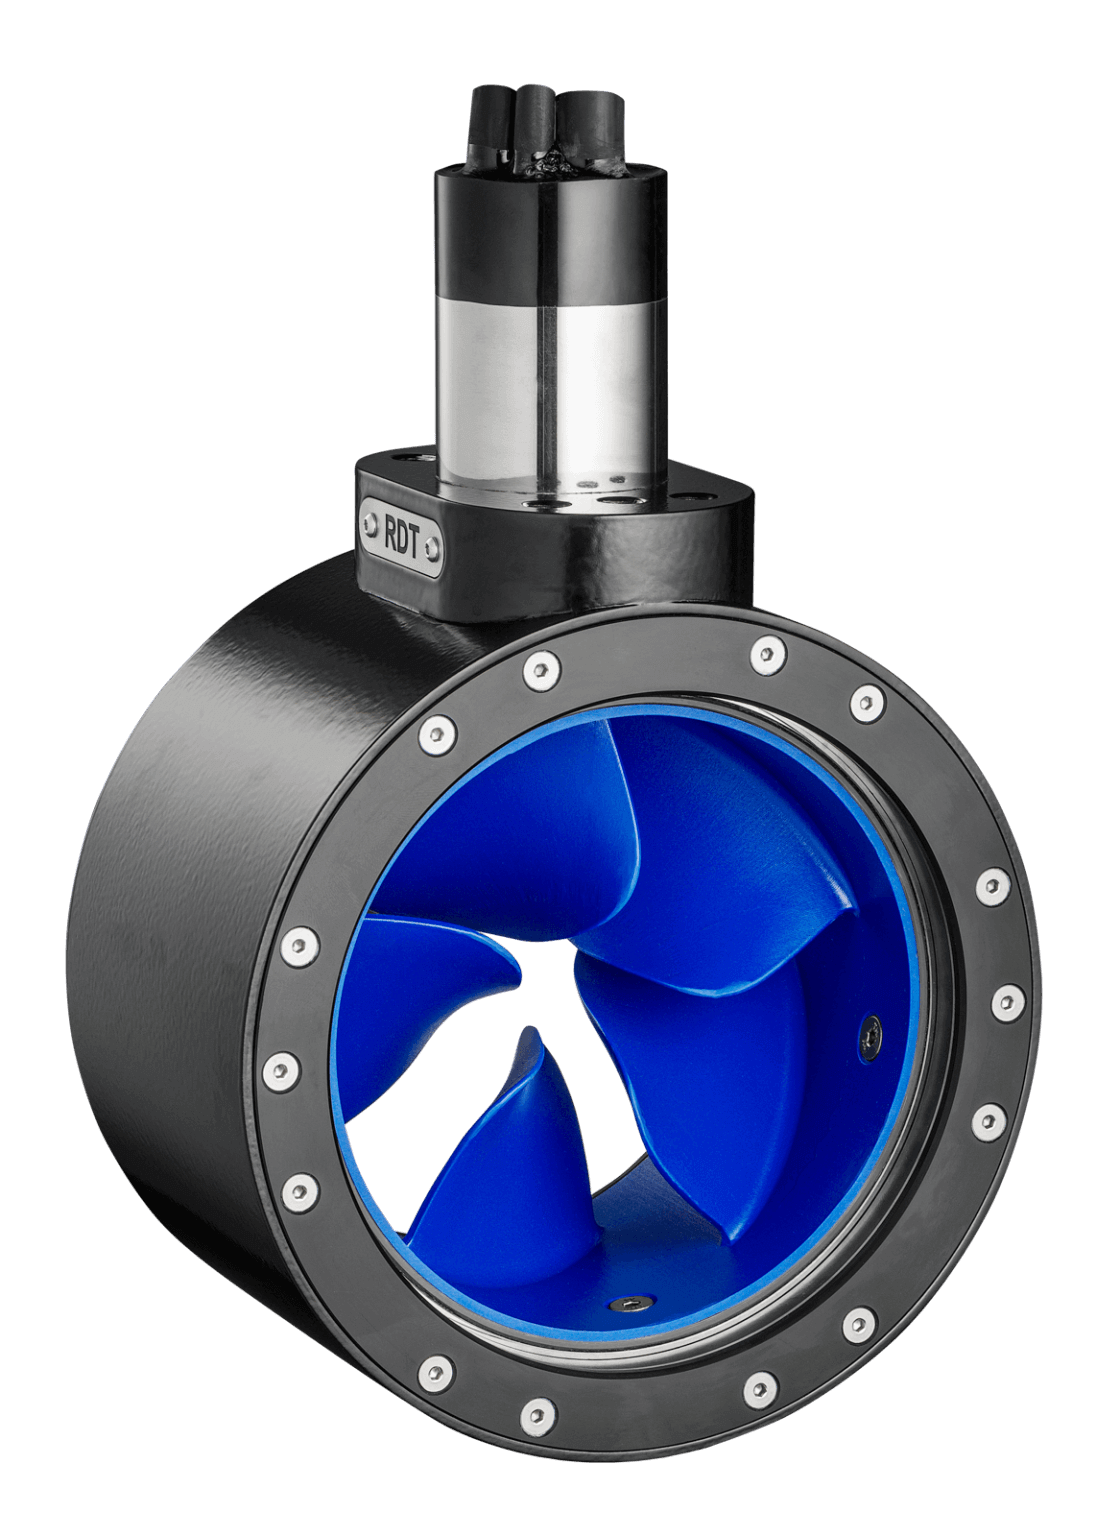 Bow thruster electric propulsion